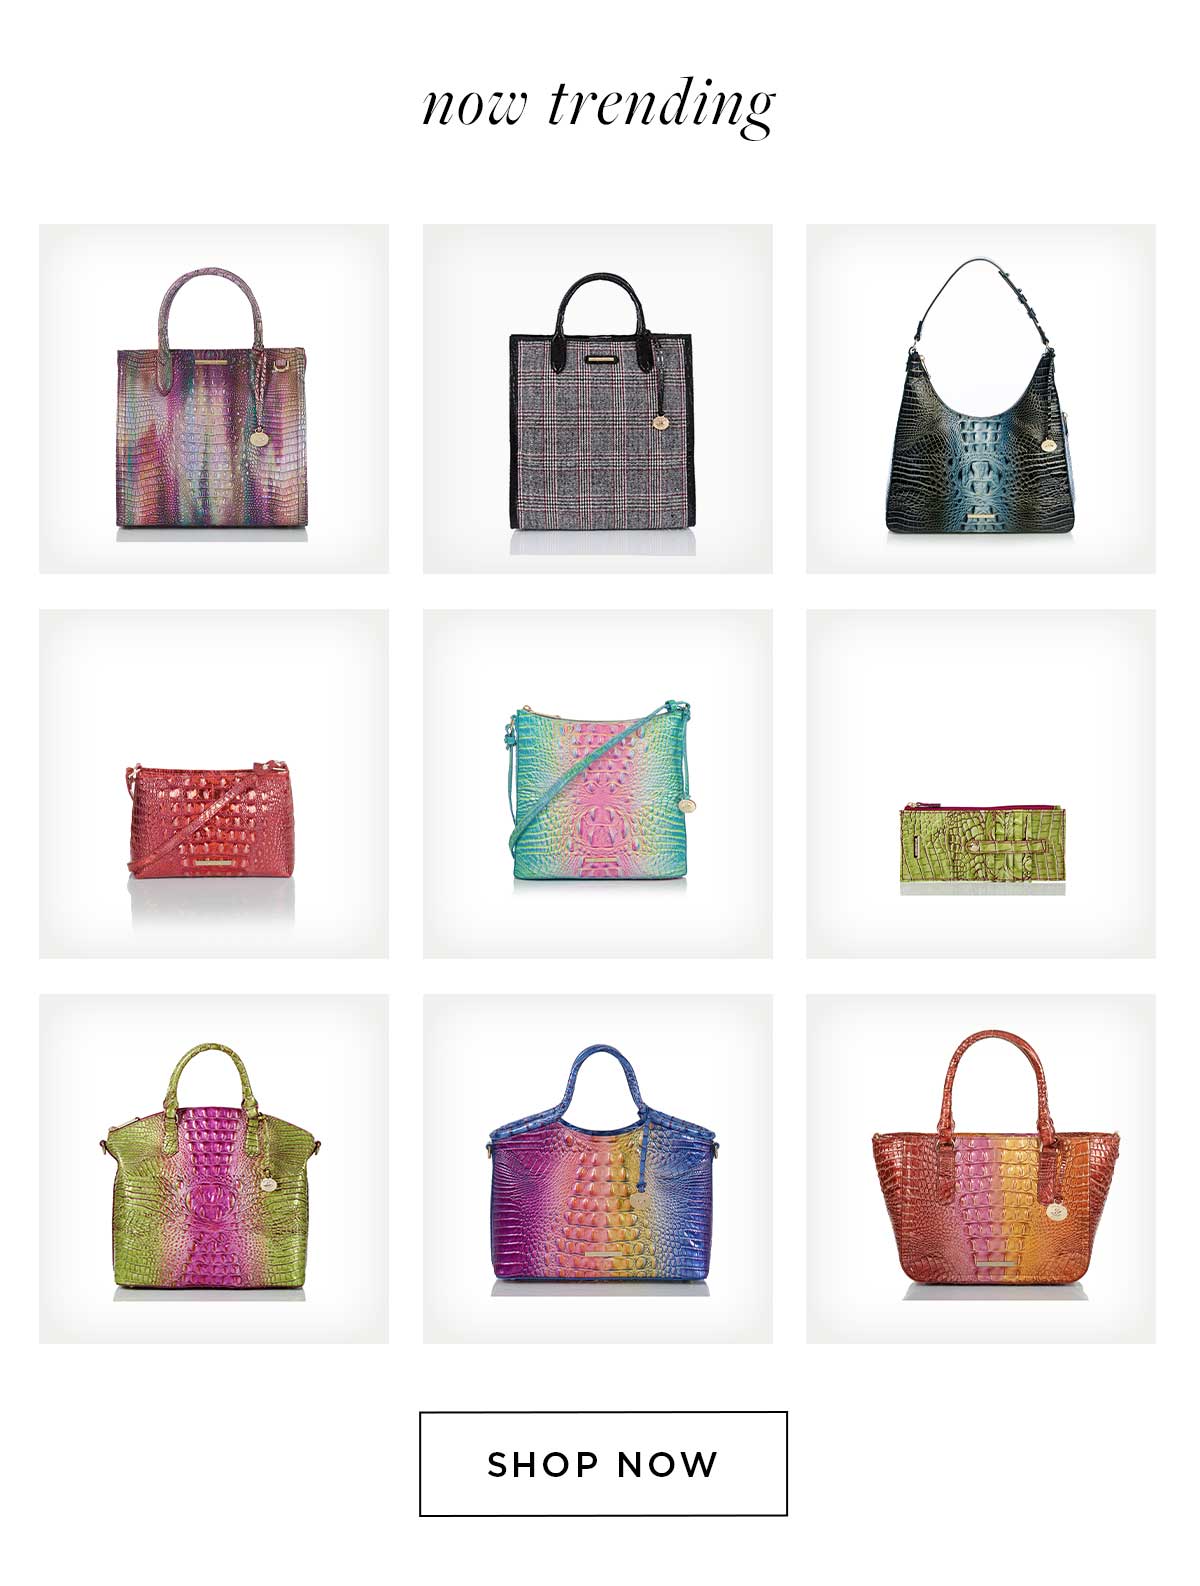 Brahmin Handbags - It's HERE!! The Online Outlet Event is ON